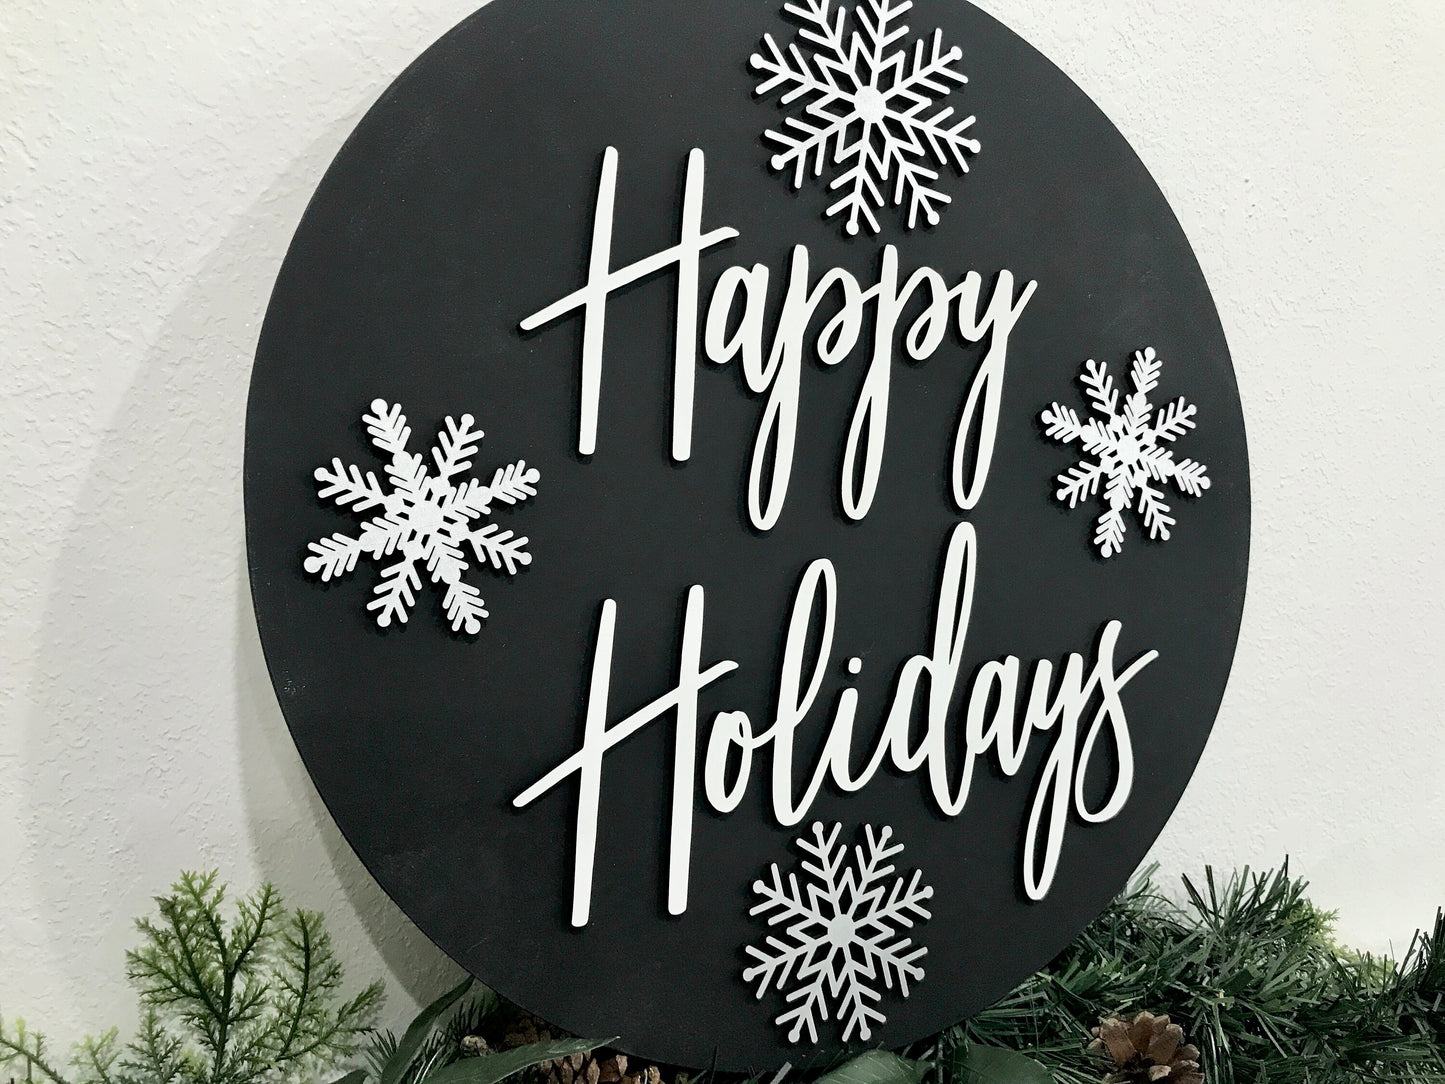 Happy holidays sign, Christmas decorations, 3D holiday decor wood signs, living room wooden sign wall hanging, silver snowflake mantel decor